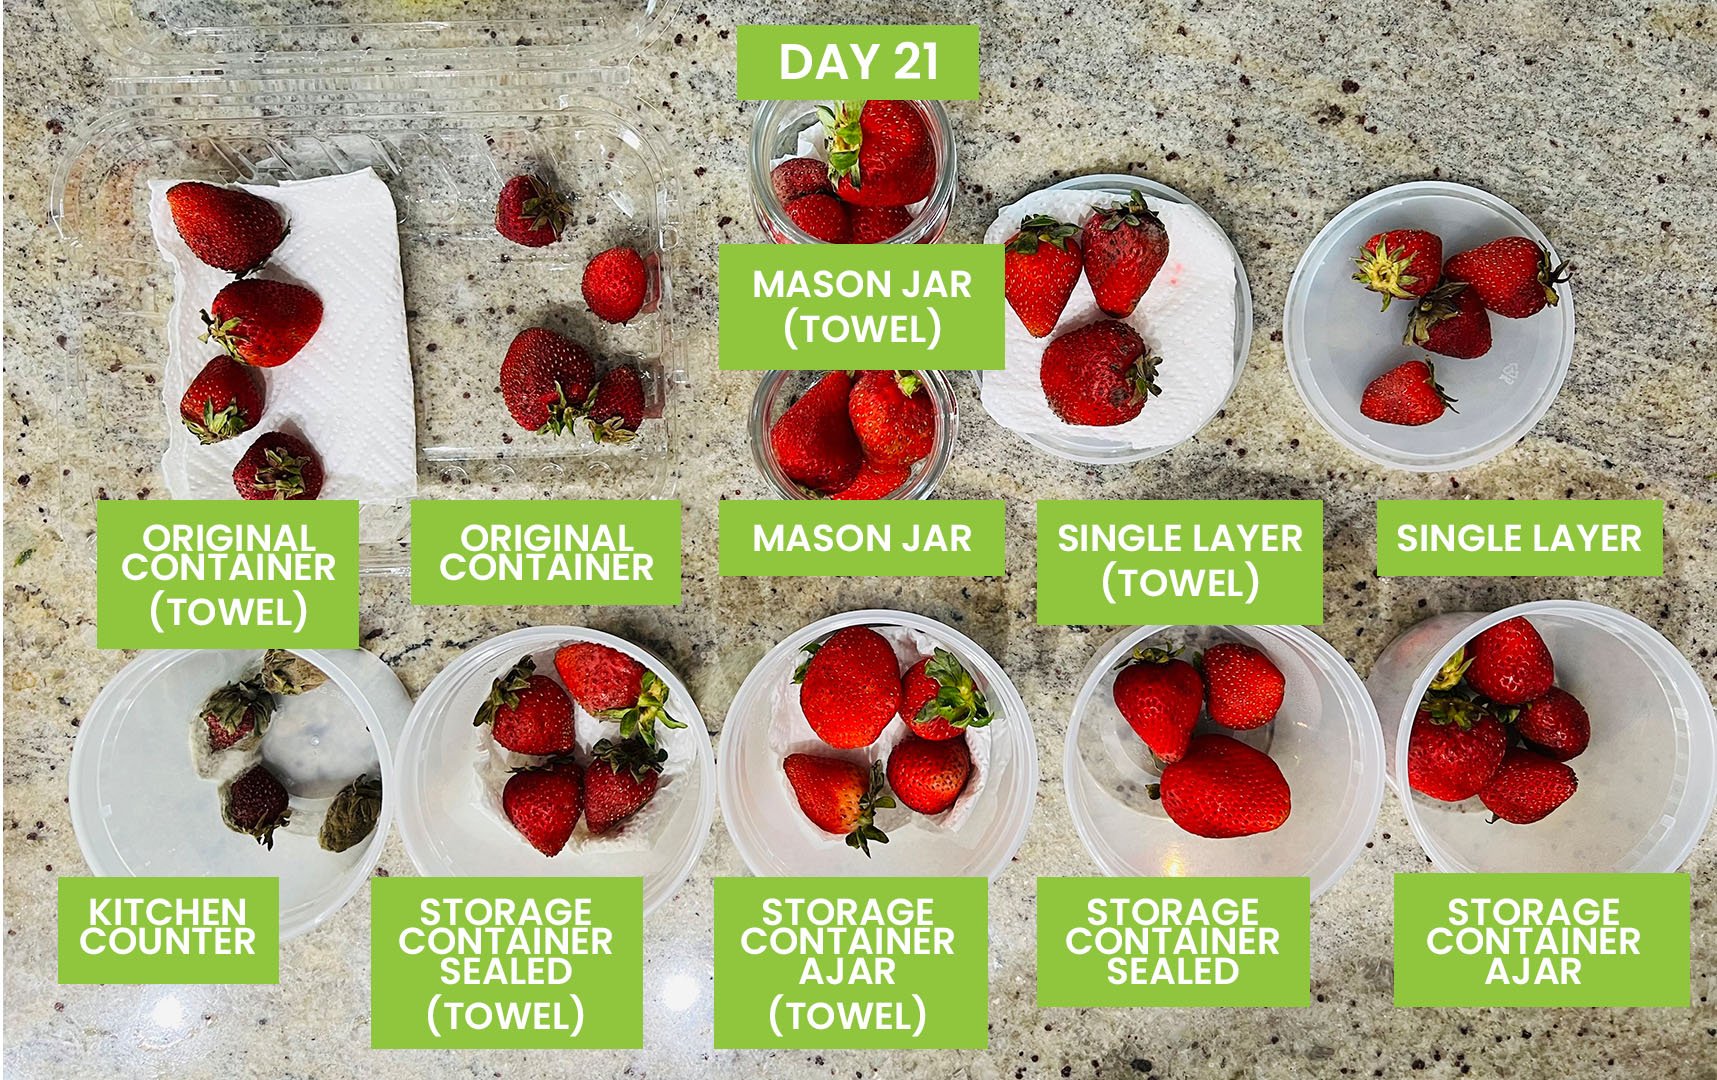 Strawberries: How to store, freeze, prevent mold, keep from spoiling